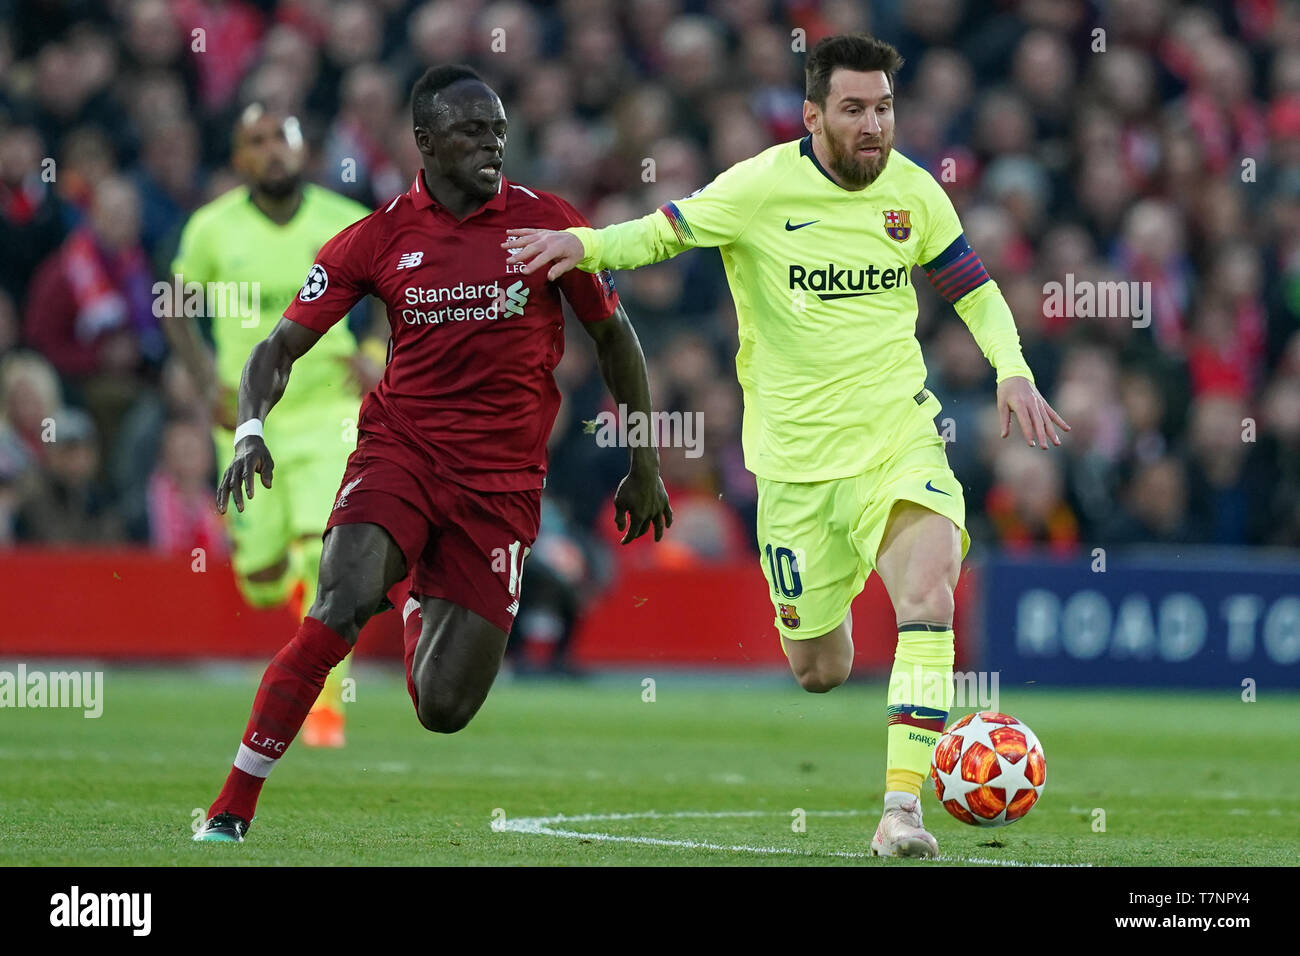 Barcelona's Lionel Messi under pressure from Liverpool's Sadio Mane 7th  Mayl 2019 , Anfield Stadium, Liverpool, England; UEFA Champions League Semi  Final, Second Leg, Liverpool FC vs FC Barcelona Credit: Terry Donnelly/News